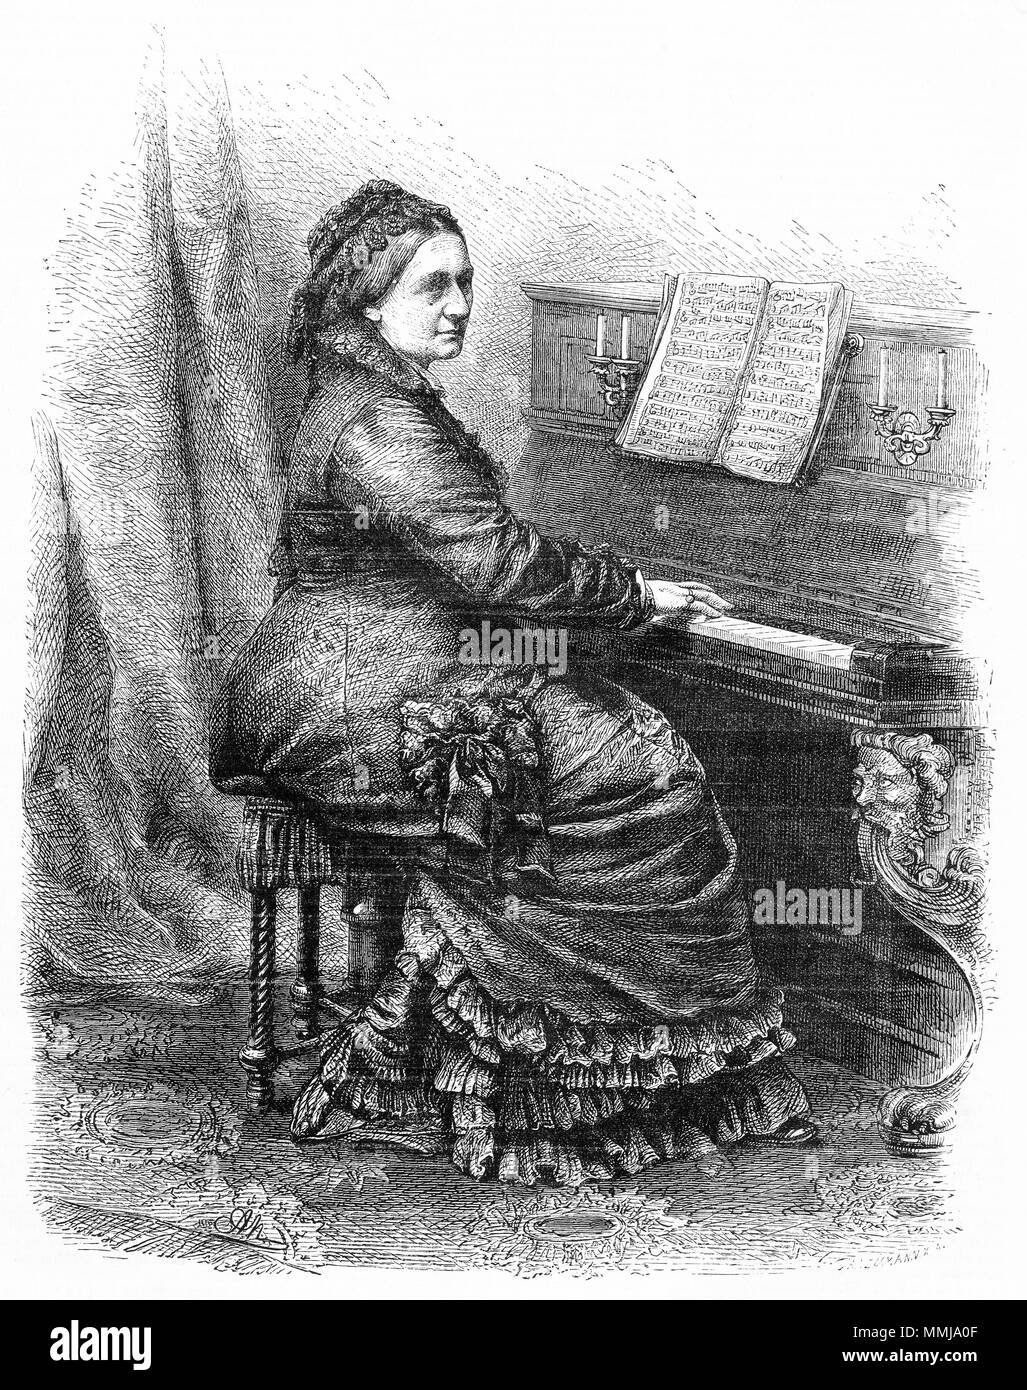 Engraving of Madame Schumann playing a piano. From an original engraving in the Girl's Own Paper magazine 1883. Stock Photo